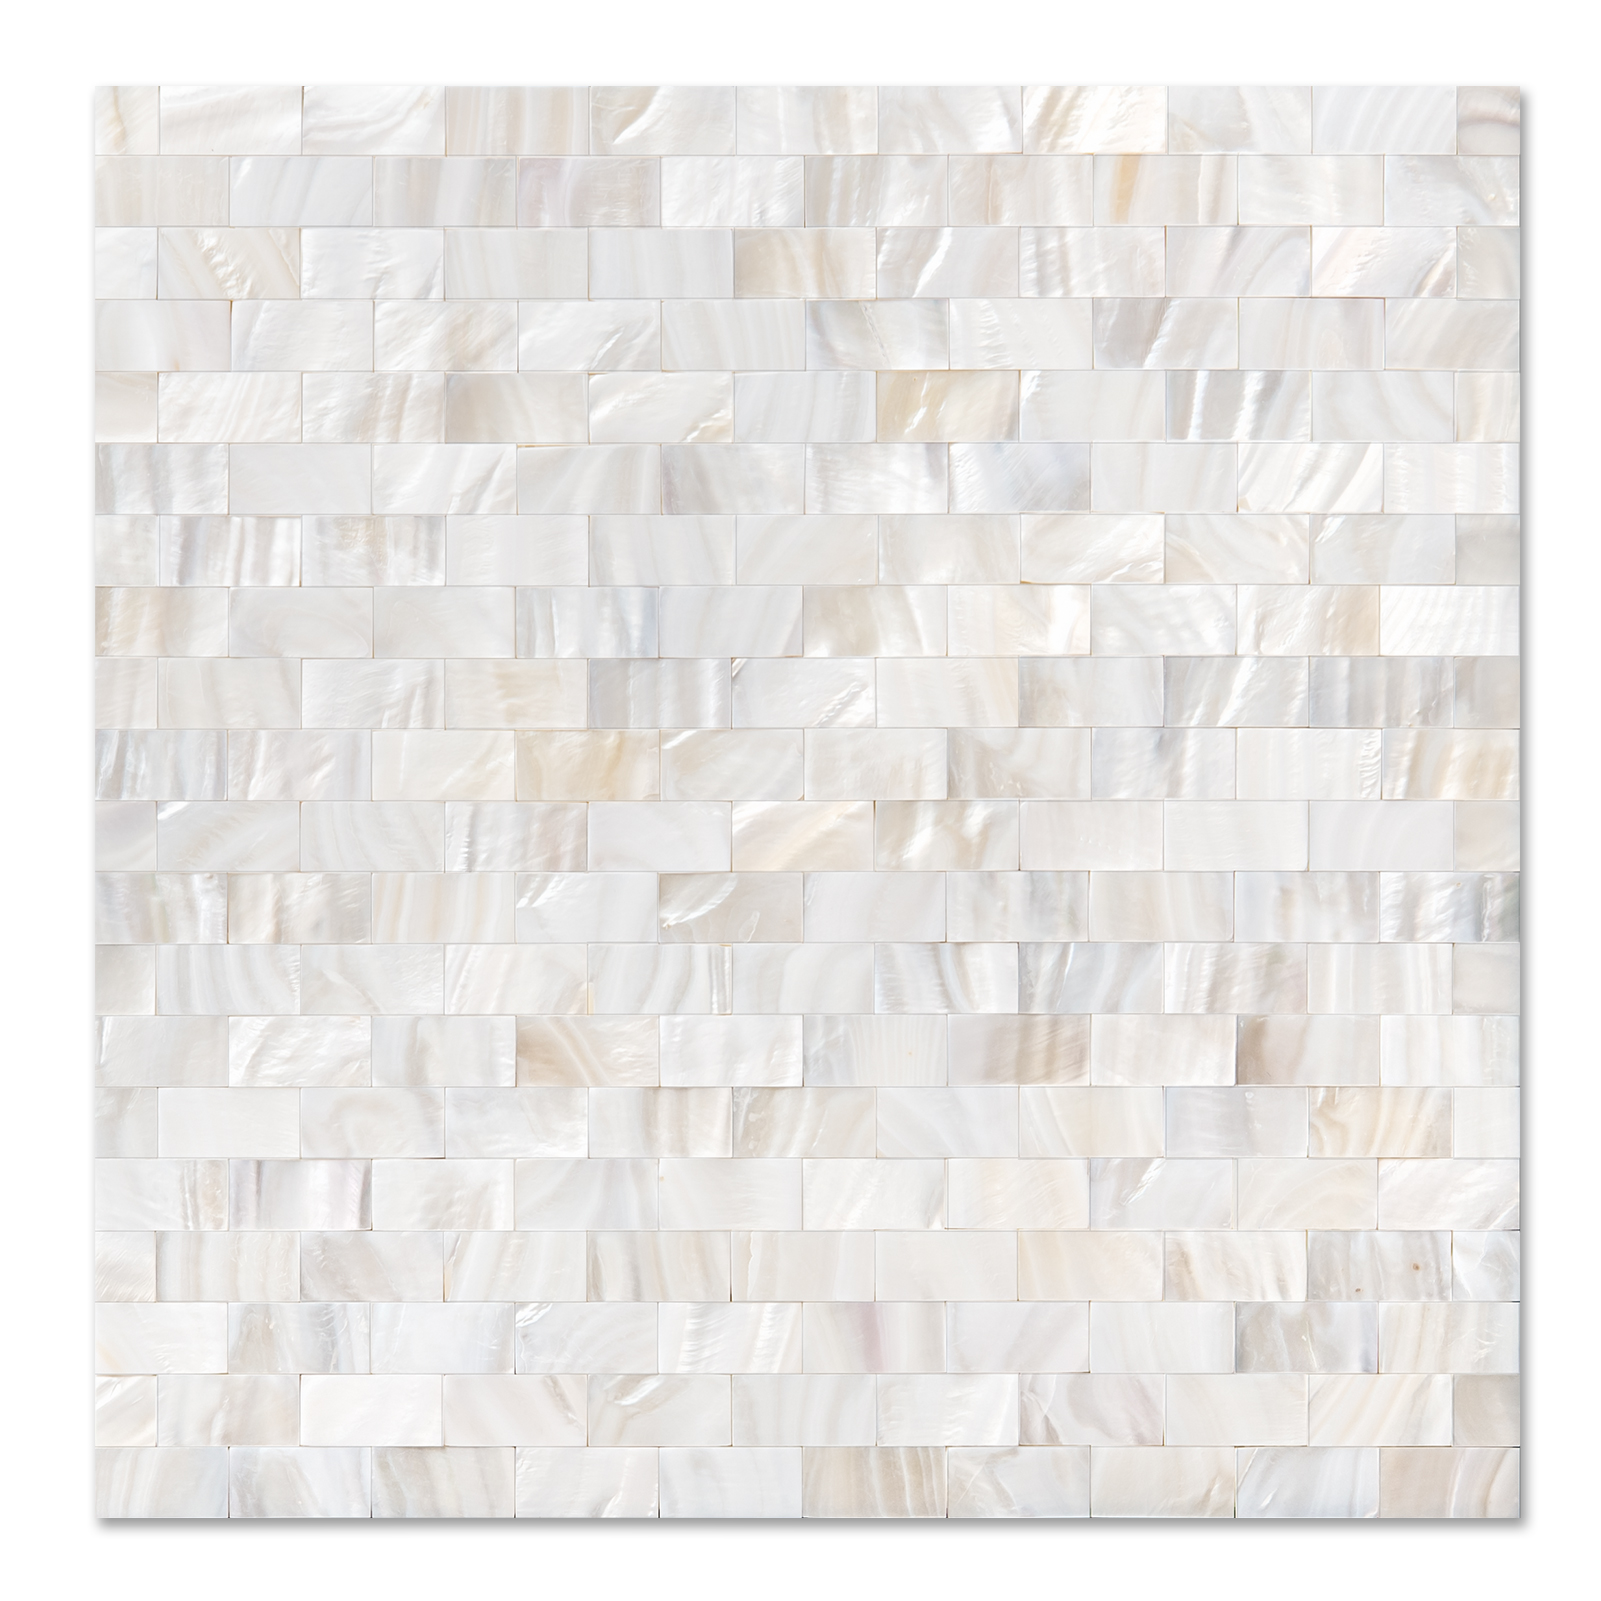 A18202 - 6-Pack Mother of Pearl Shell Tile for Kitchen Backsplashes / Shower Wall, 12